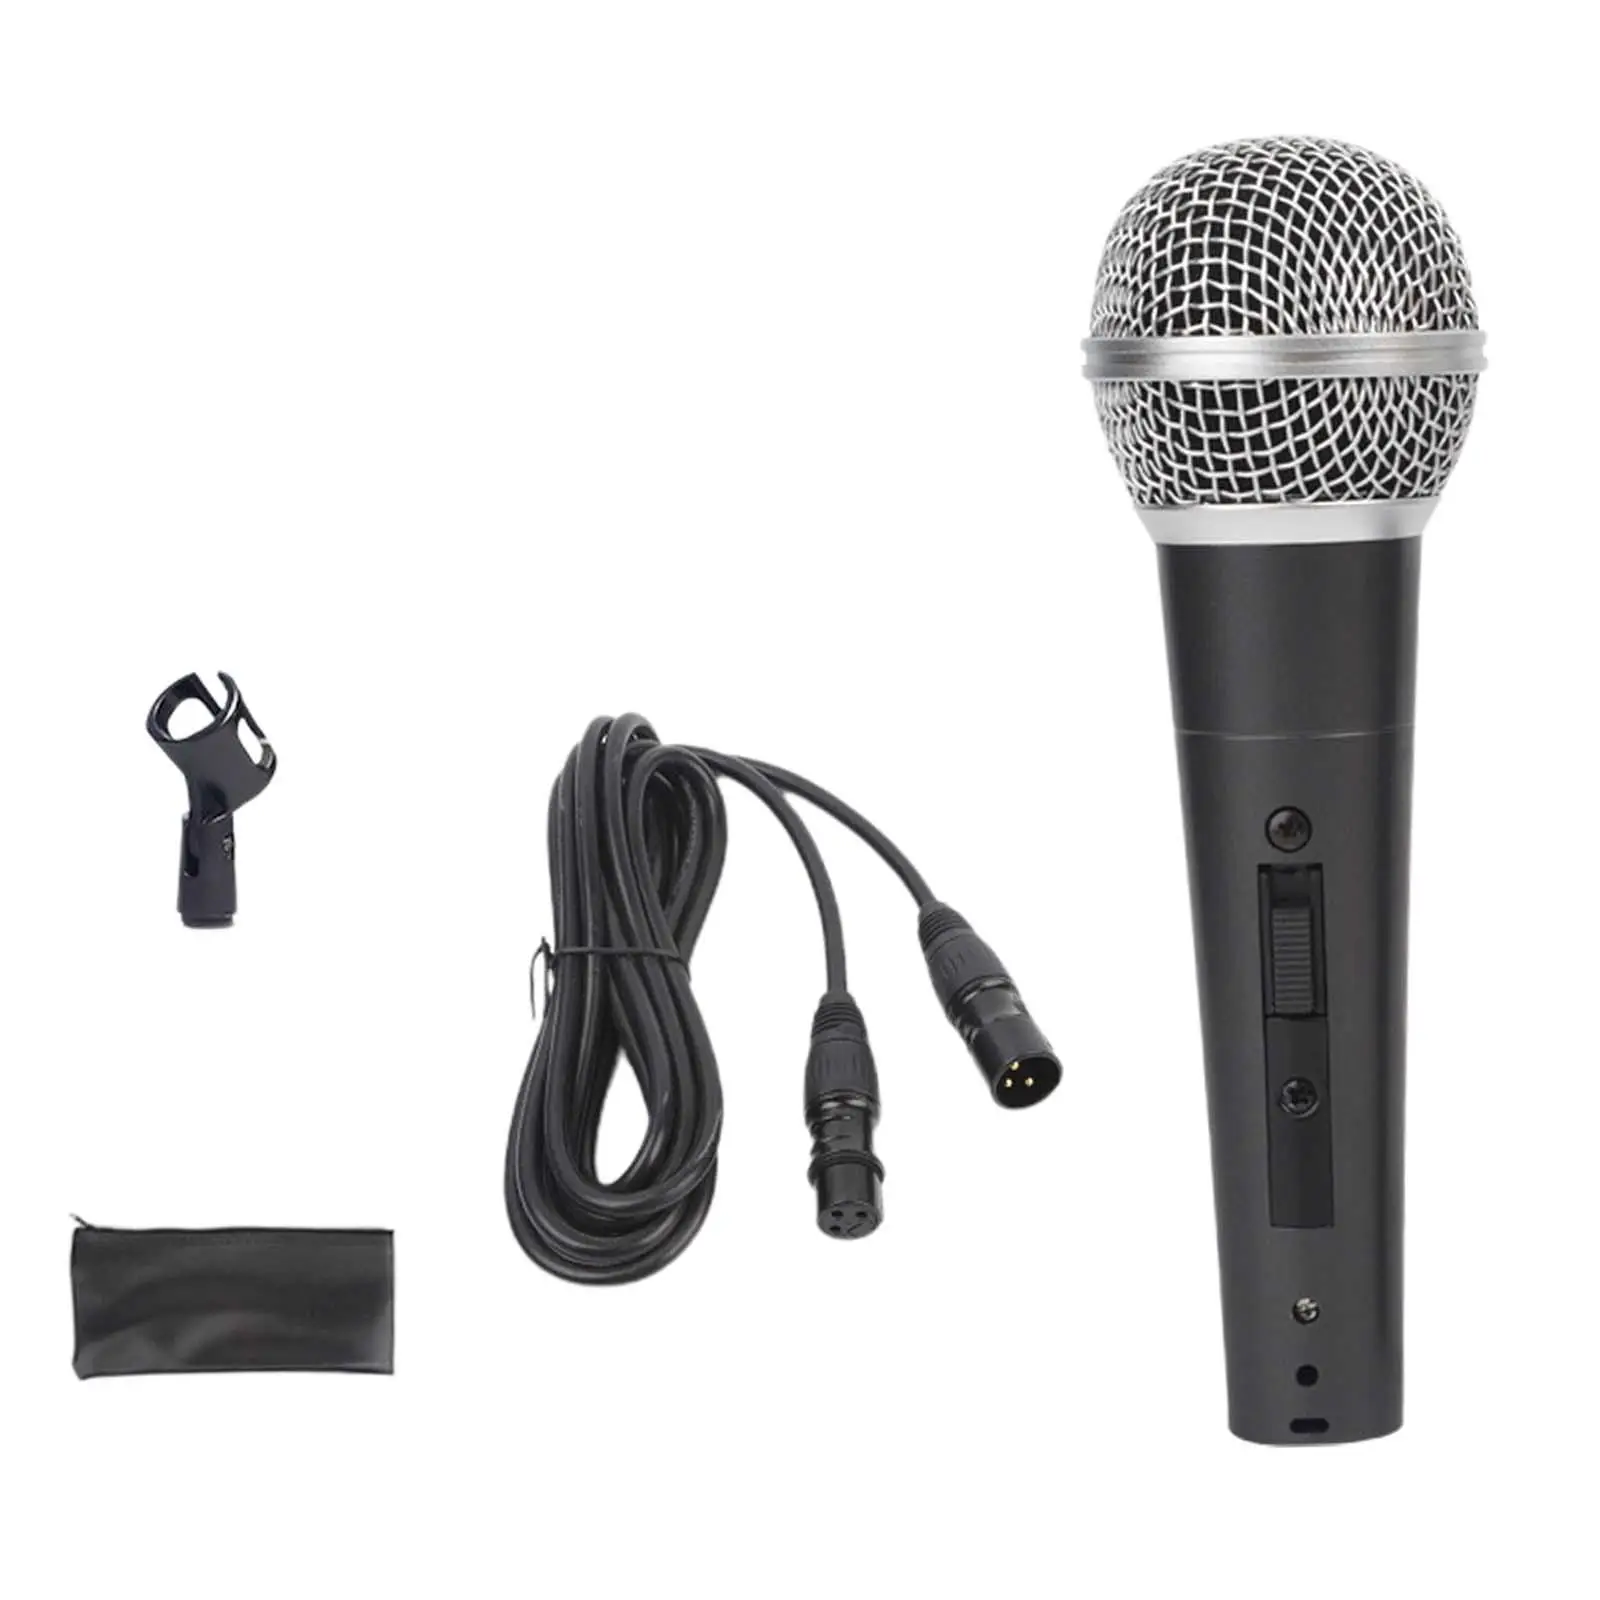 Wired Microphone XLR Detachable Cable with on and Off Switch Long Range Dynamic Cardioid Microphone for Home KTV Speech Wedding